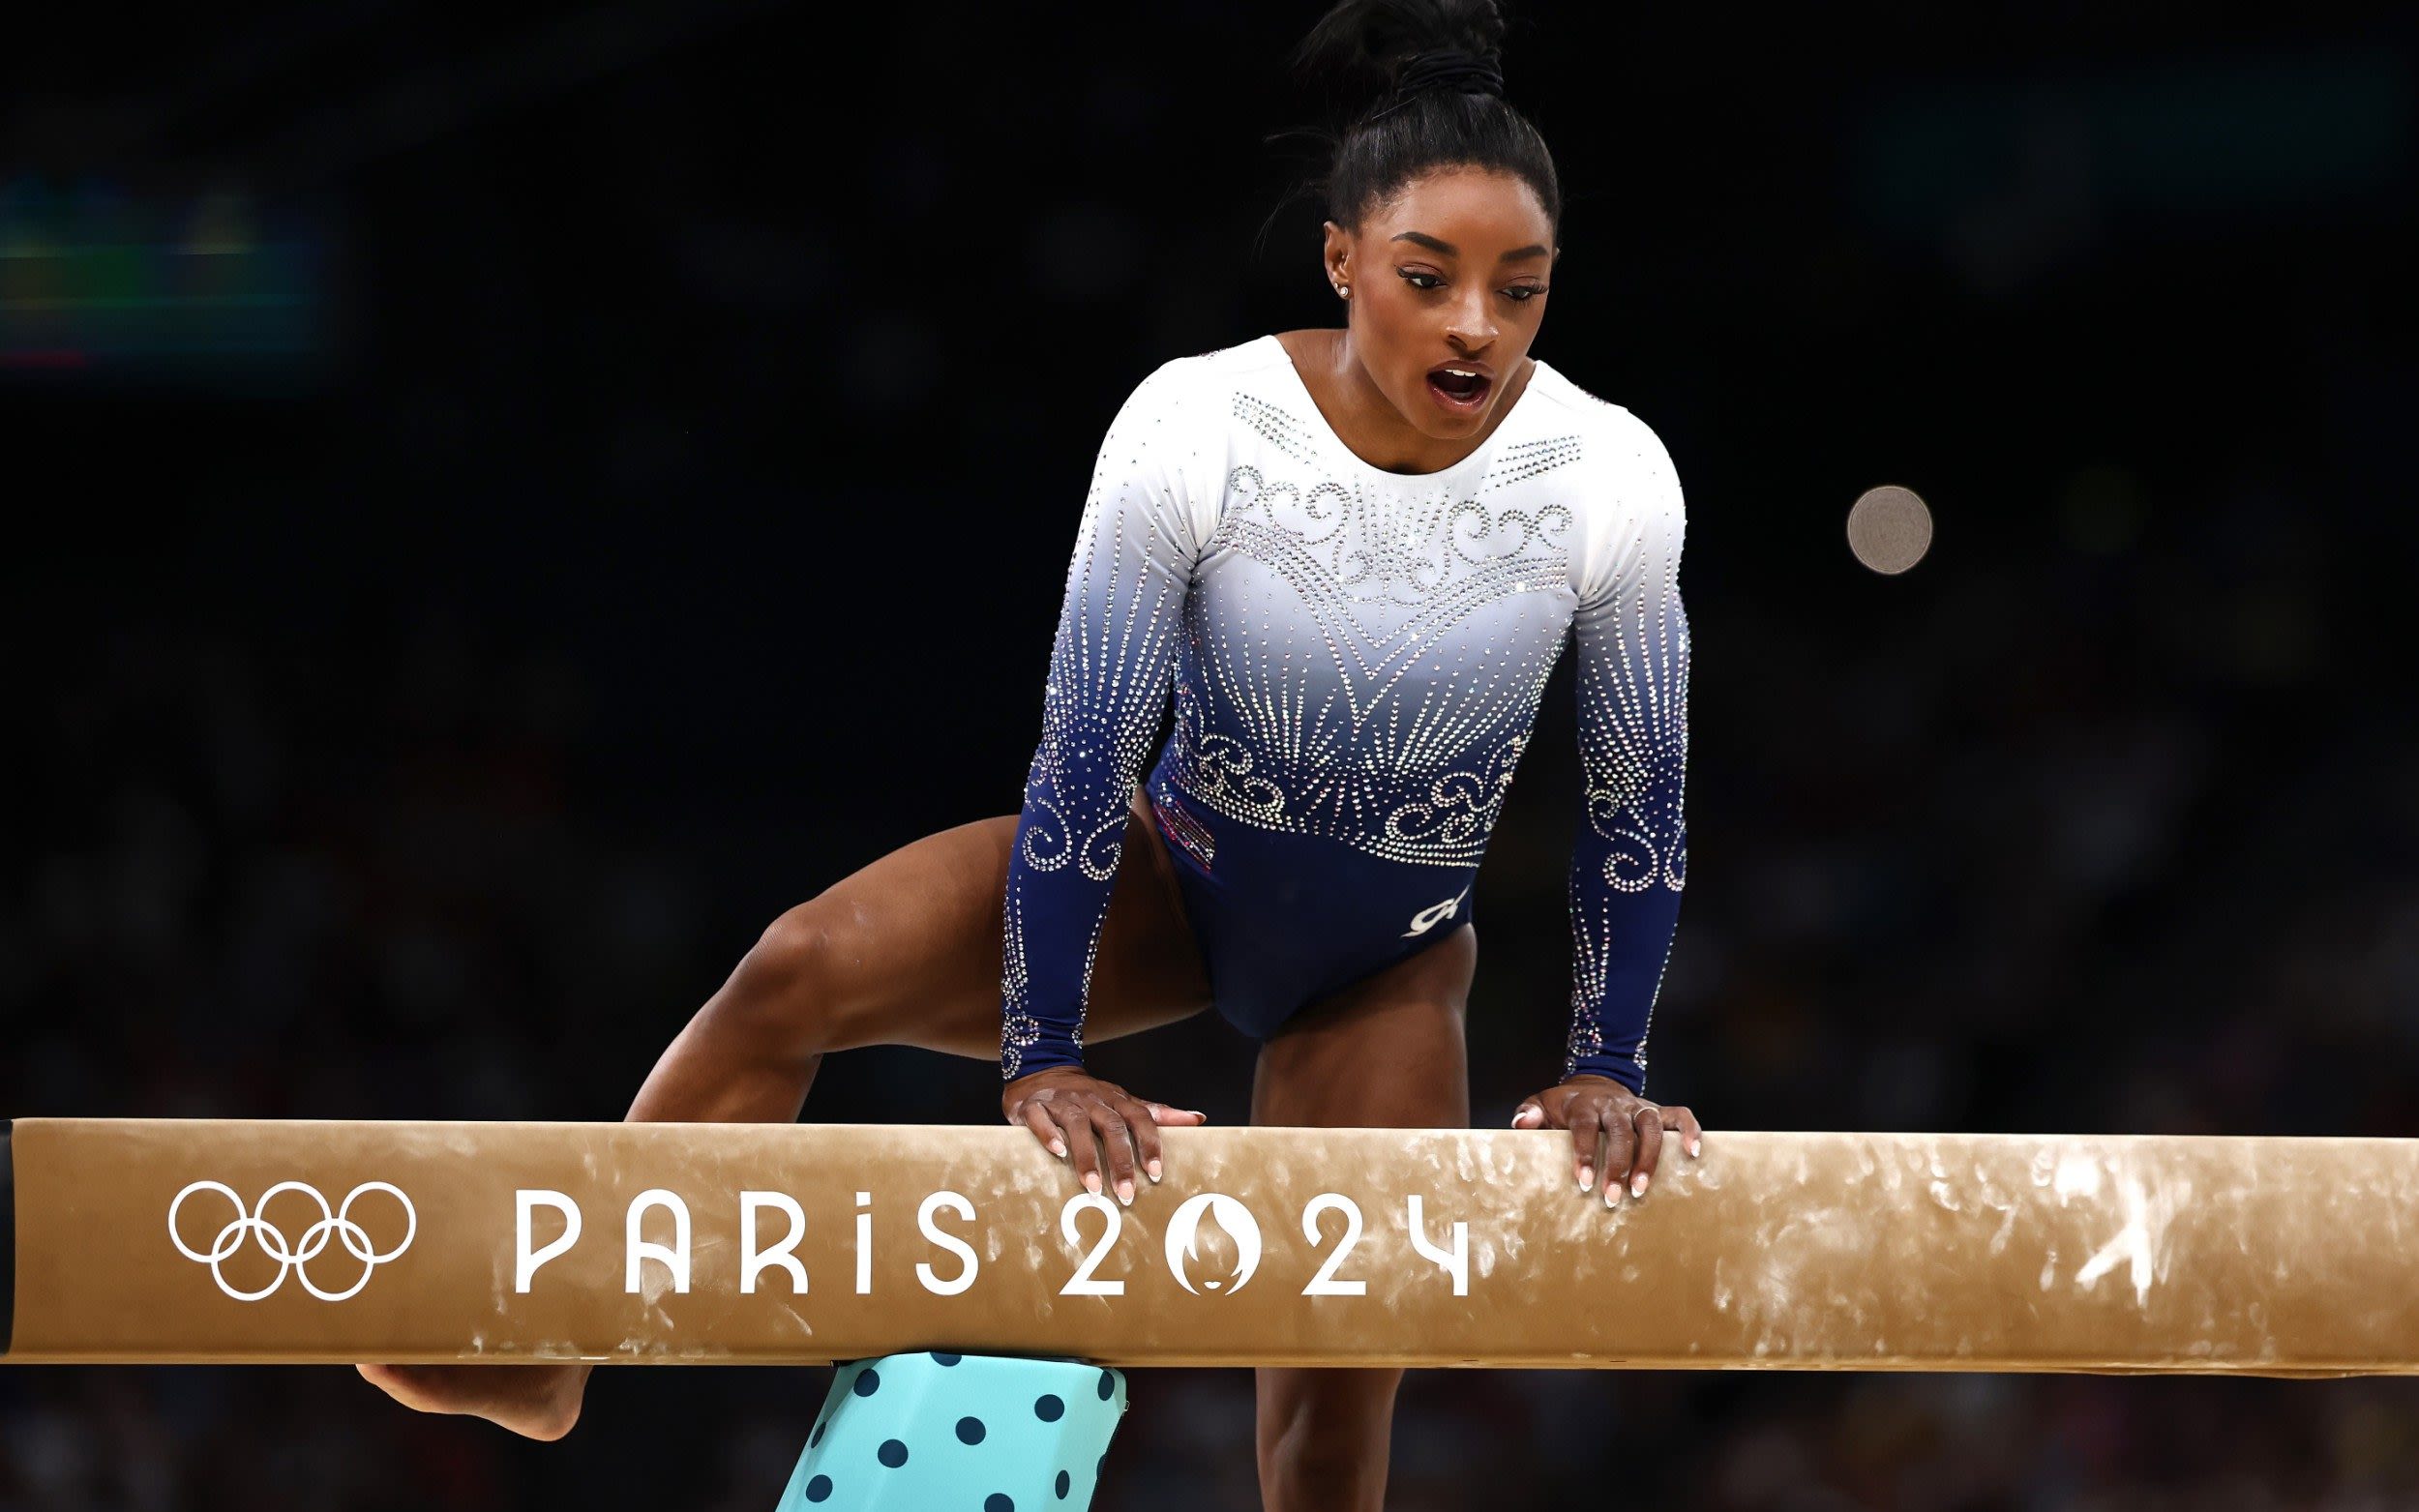 Simone Biles falls off beam then picks herself up to land floor silver medal at Paris 2024